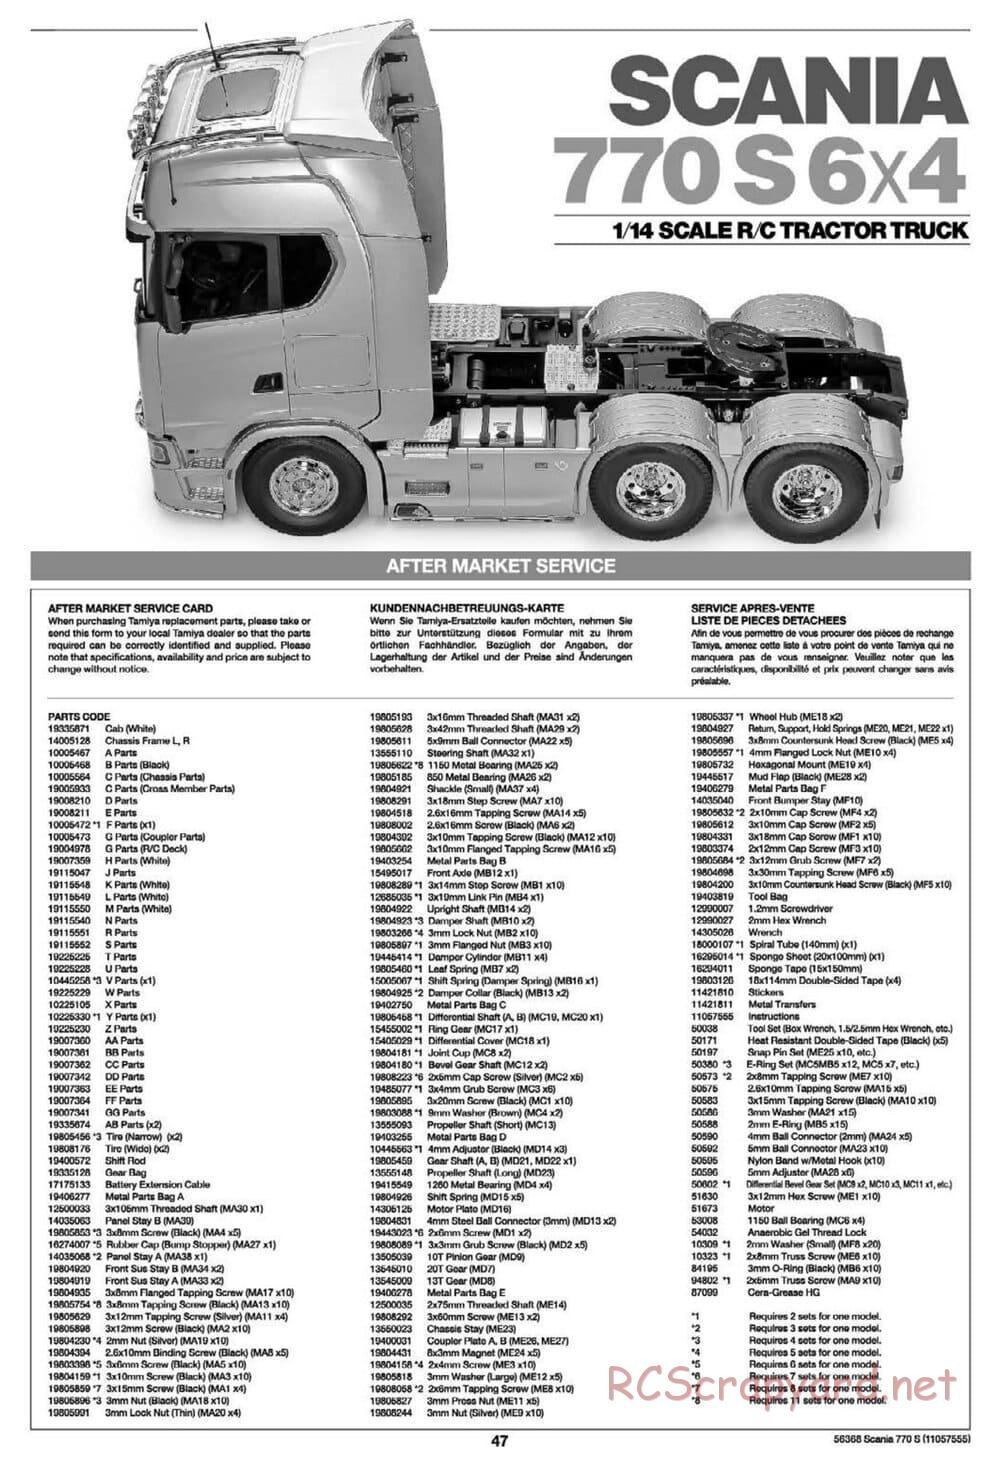 Tamiya - Scania 770S 6x4 Tractor Truck Chassis - Manual - Page 47